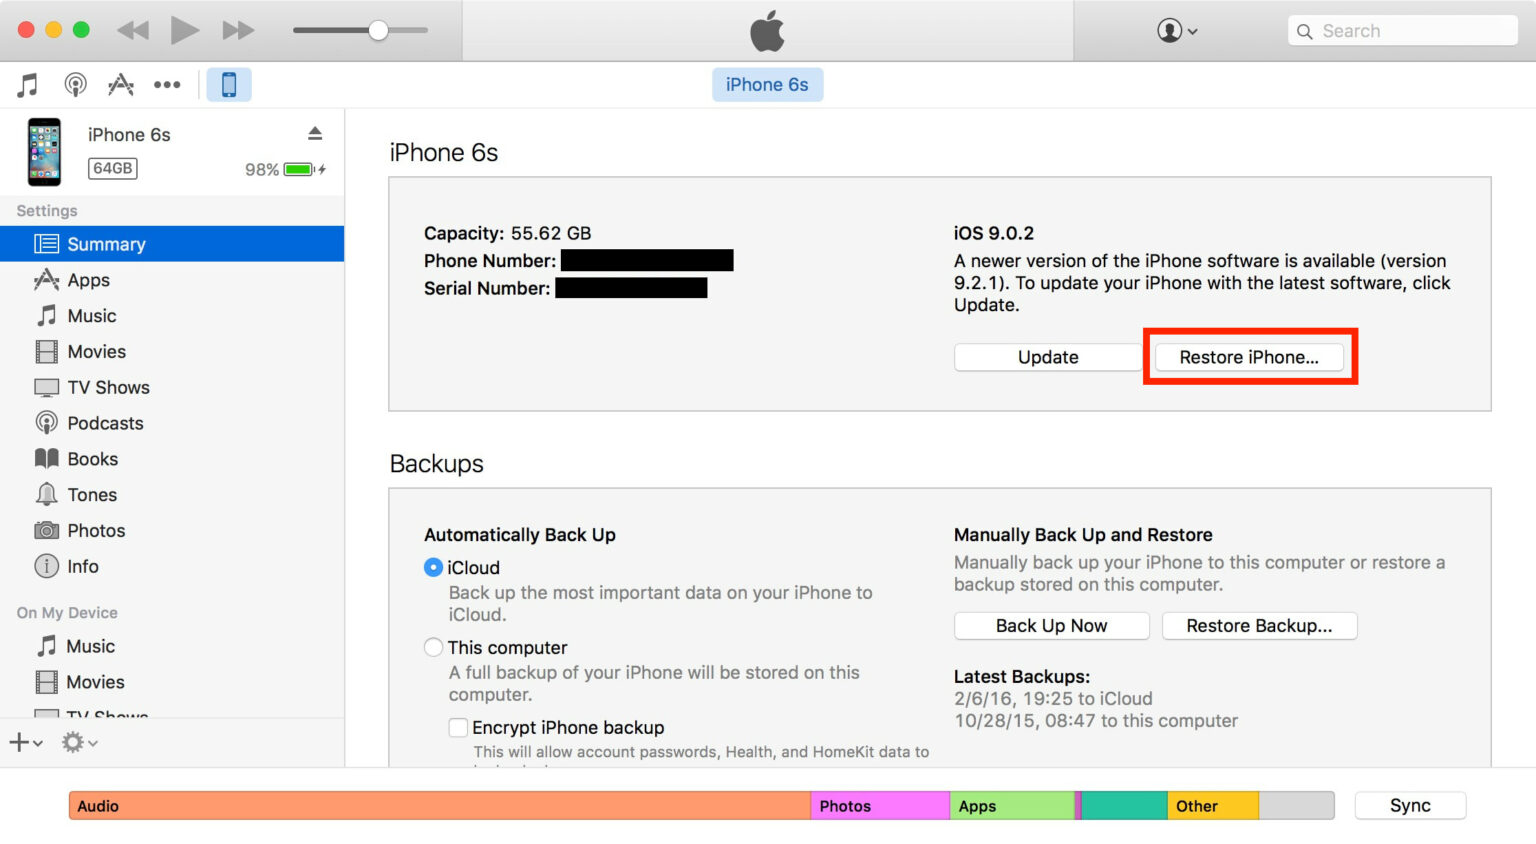 Option-to-Restore-iPhone-in-iTunes-1536×844